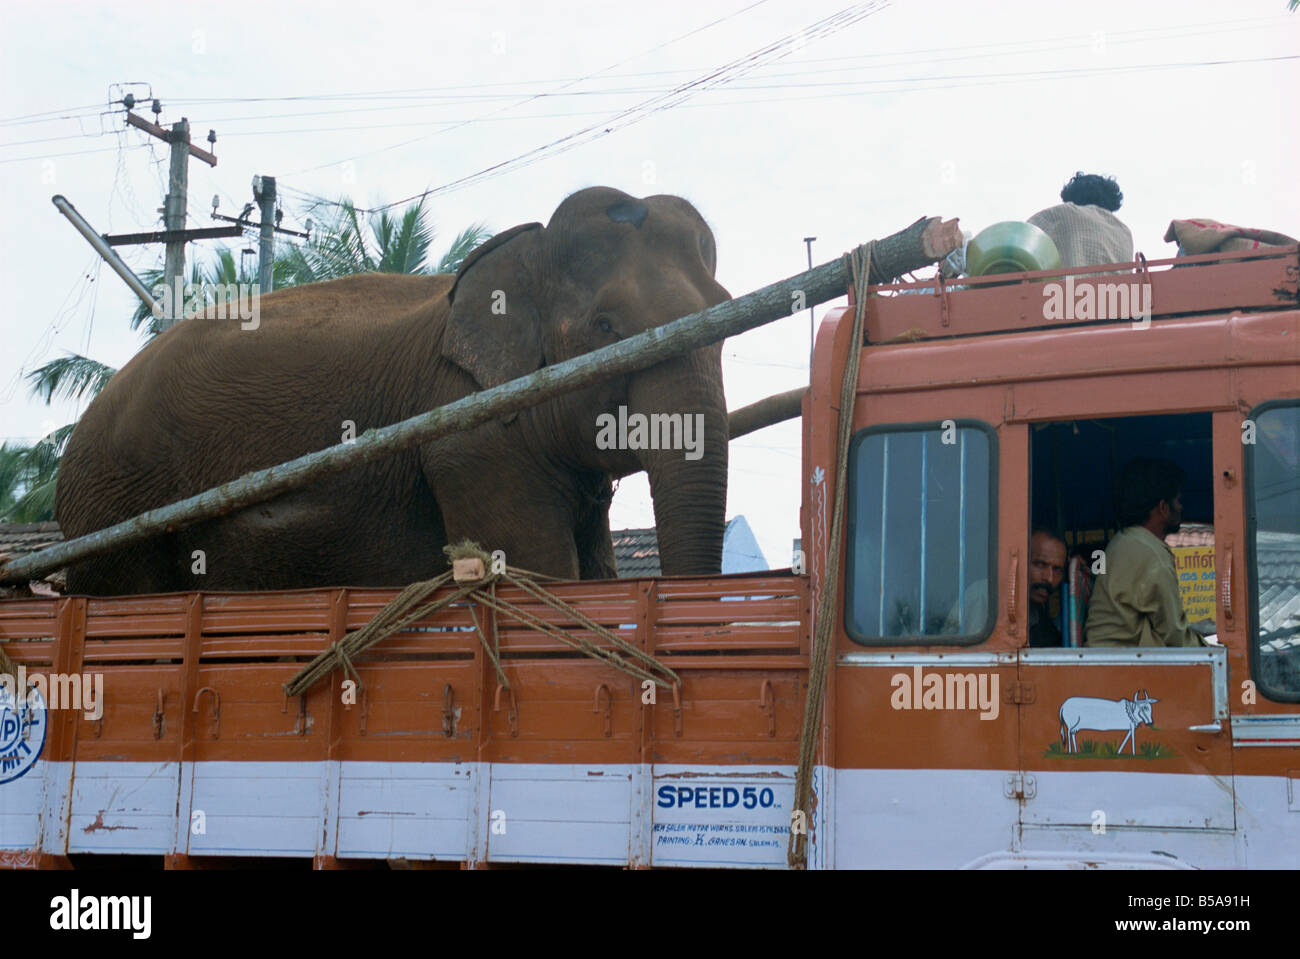 Elephant riding in back of truck, Kerala state, India Stock Photo